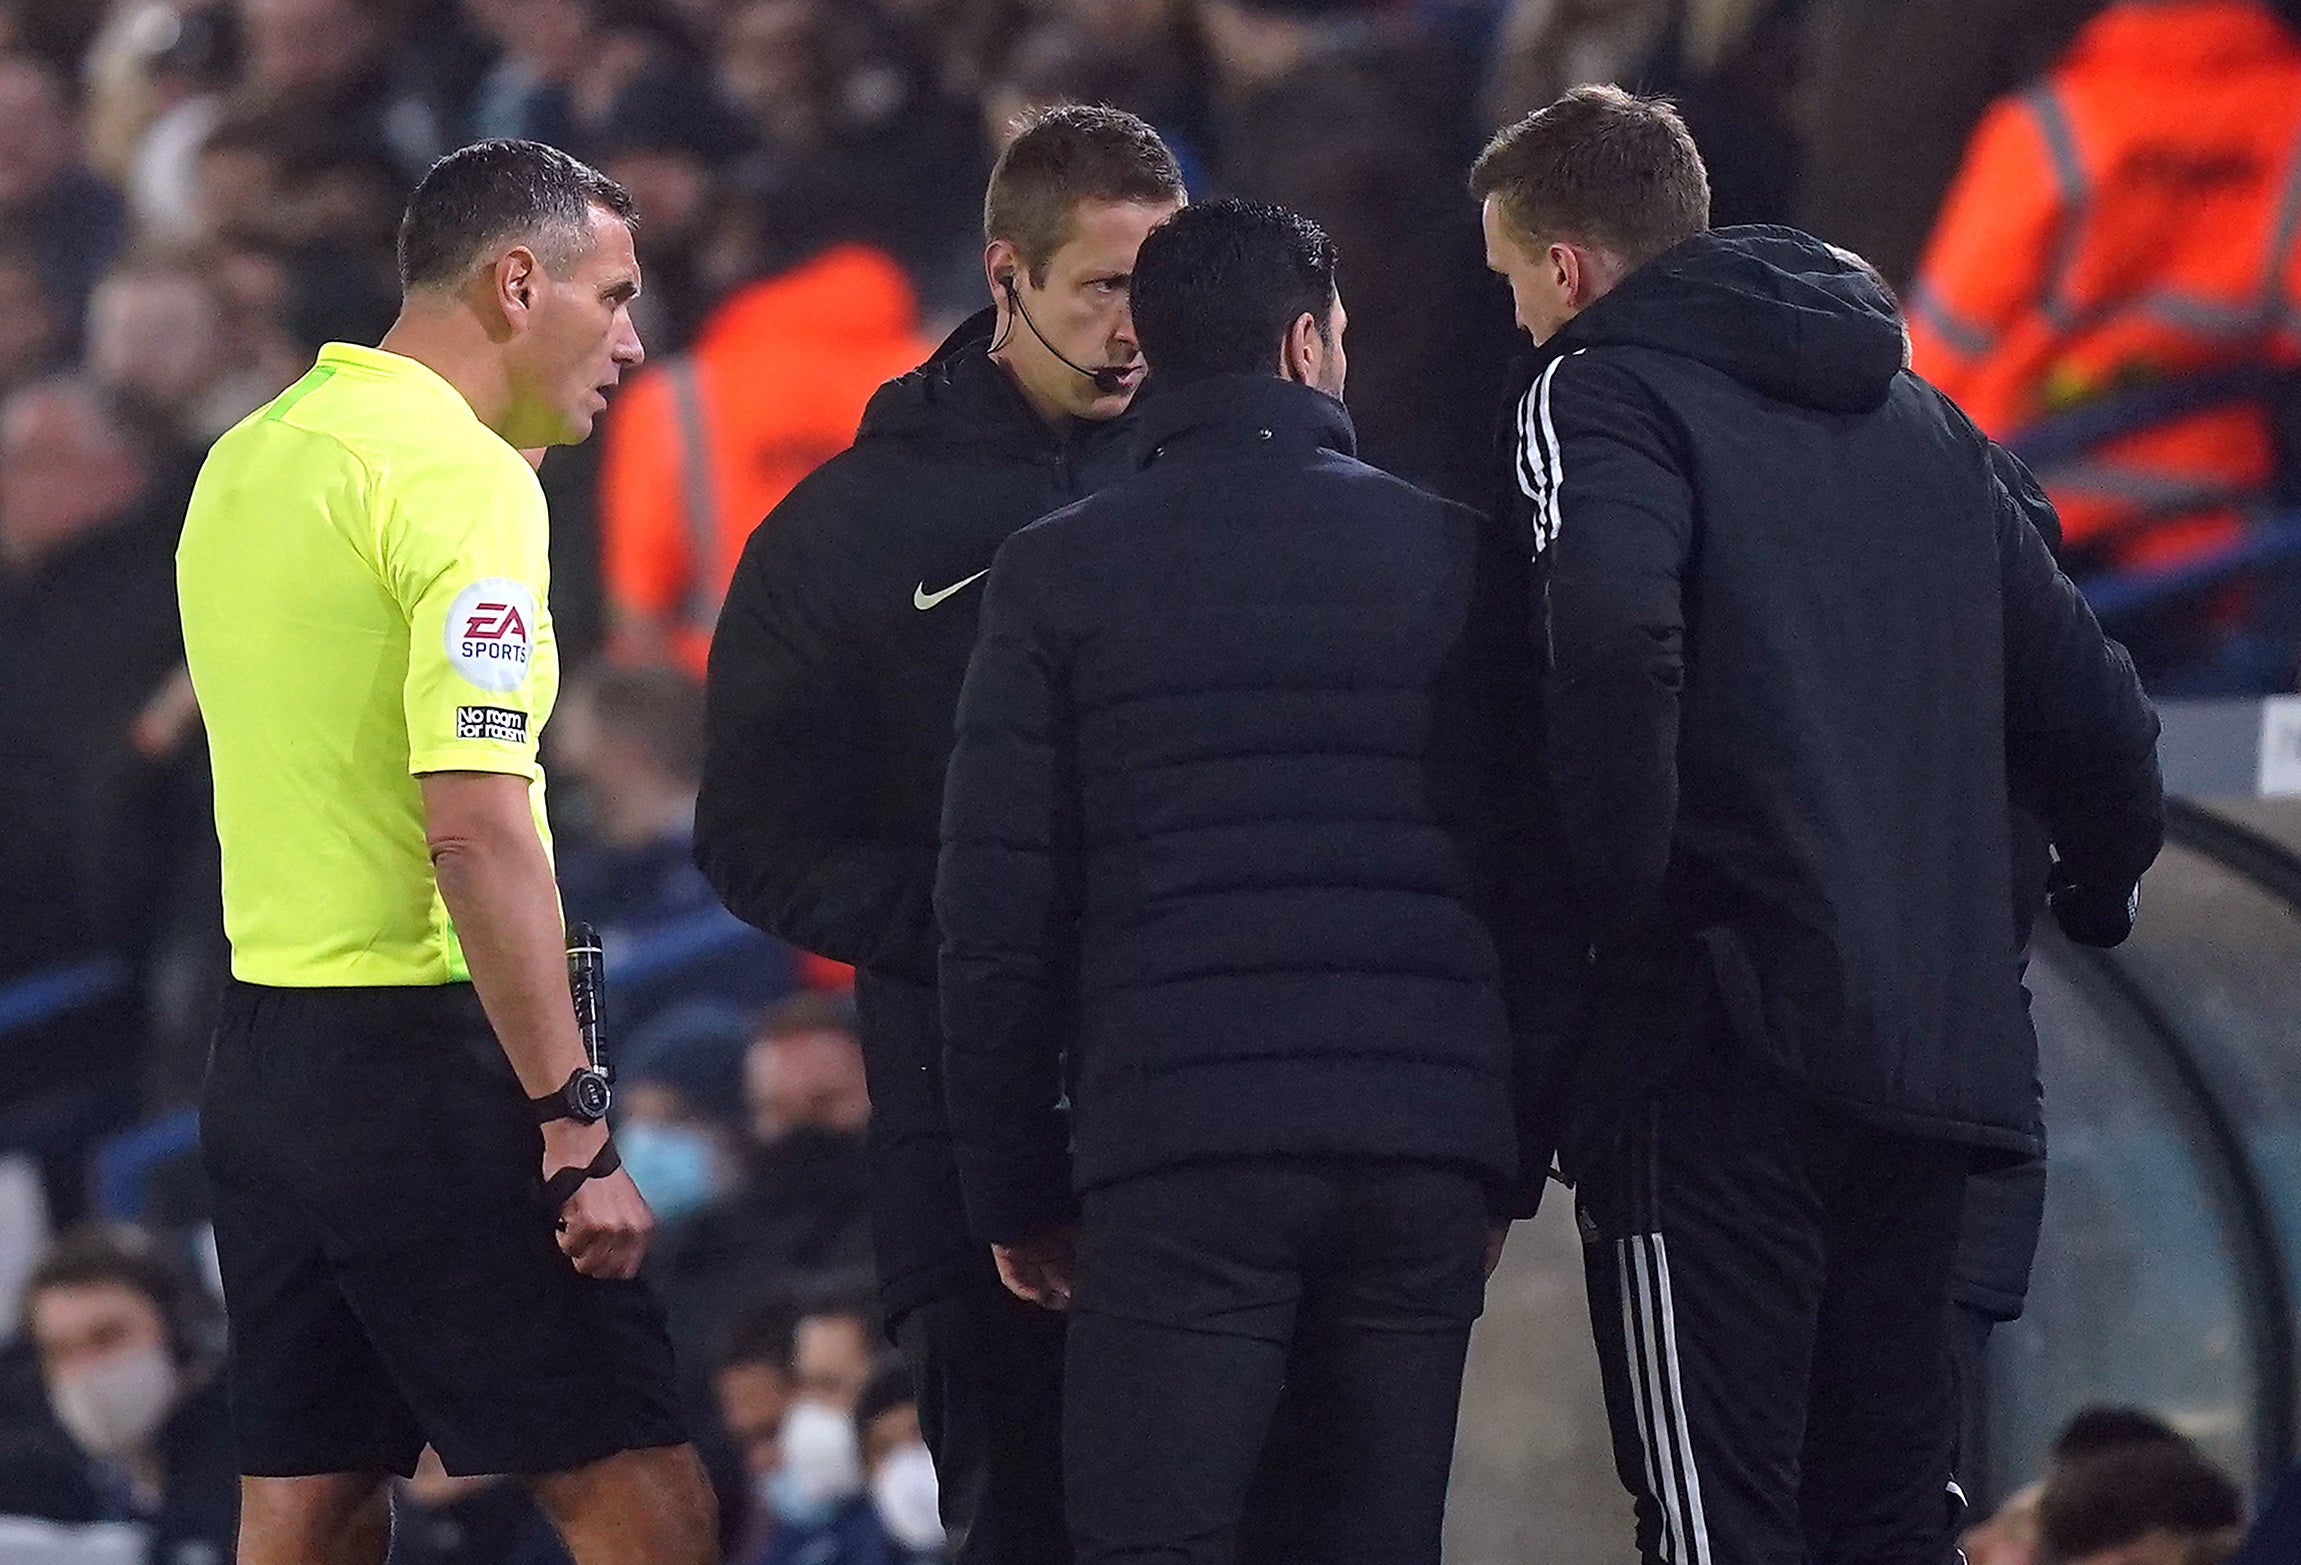 Referee Andre Marriner (left) spoke to the Arsenal bench after an alleged incident of racism during the game at Leeds (Mike Egerton/PA)